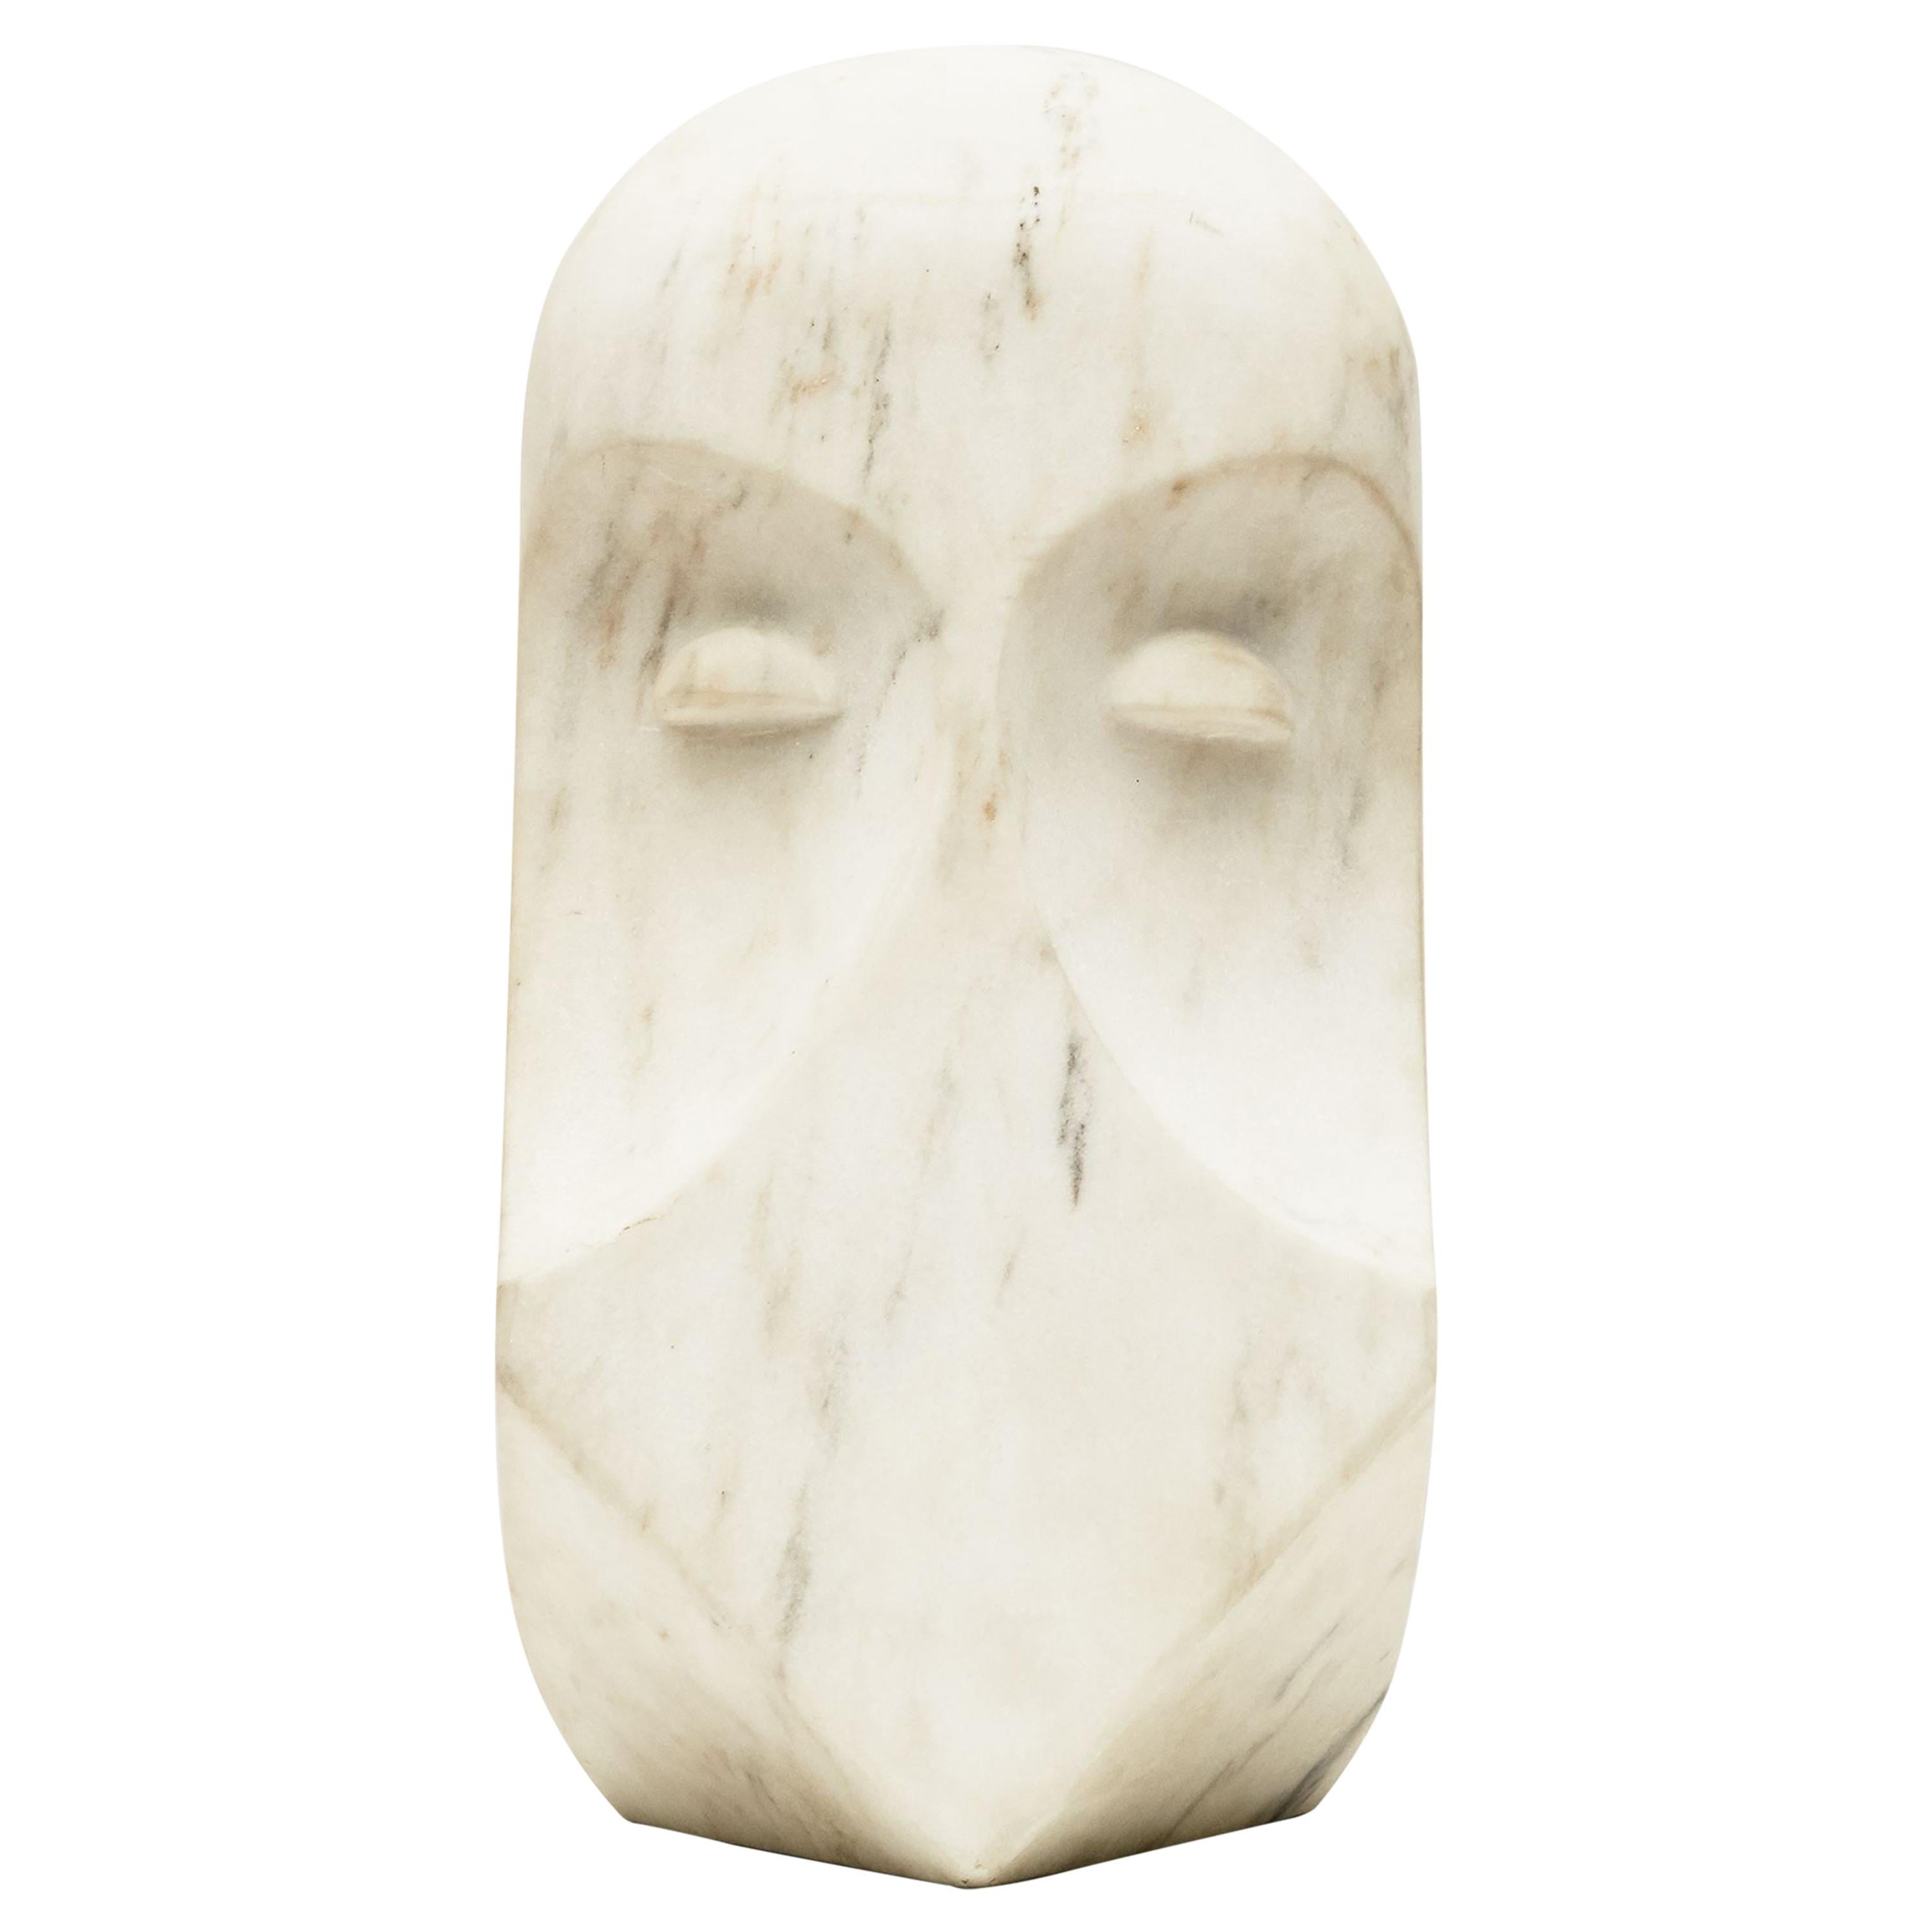 Cesare Arduini, "Omerta," Abstract White Marble Sculpture, United States, 2014